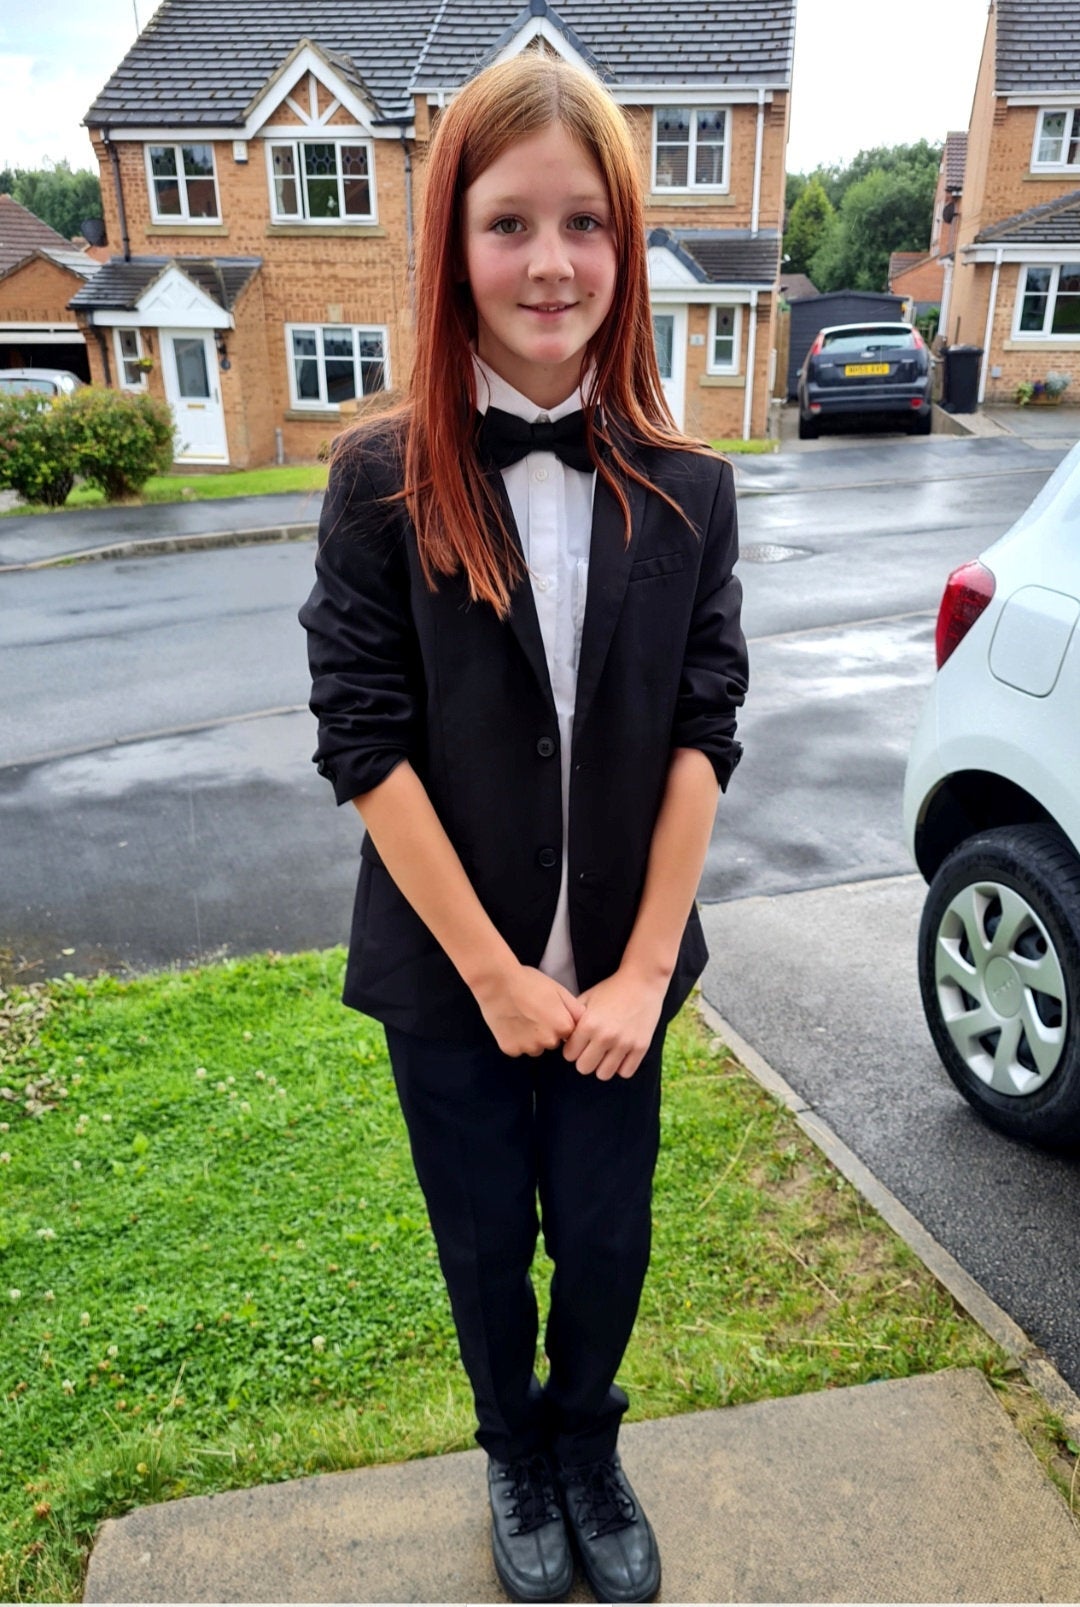 11-year-old Mischa wore a suit to prom and parents sniggered at her